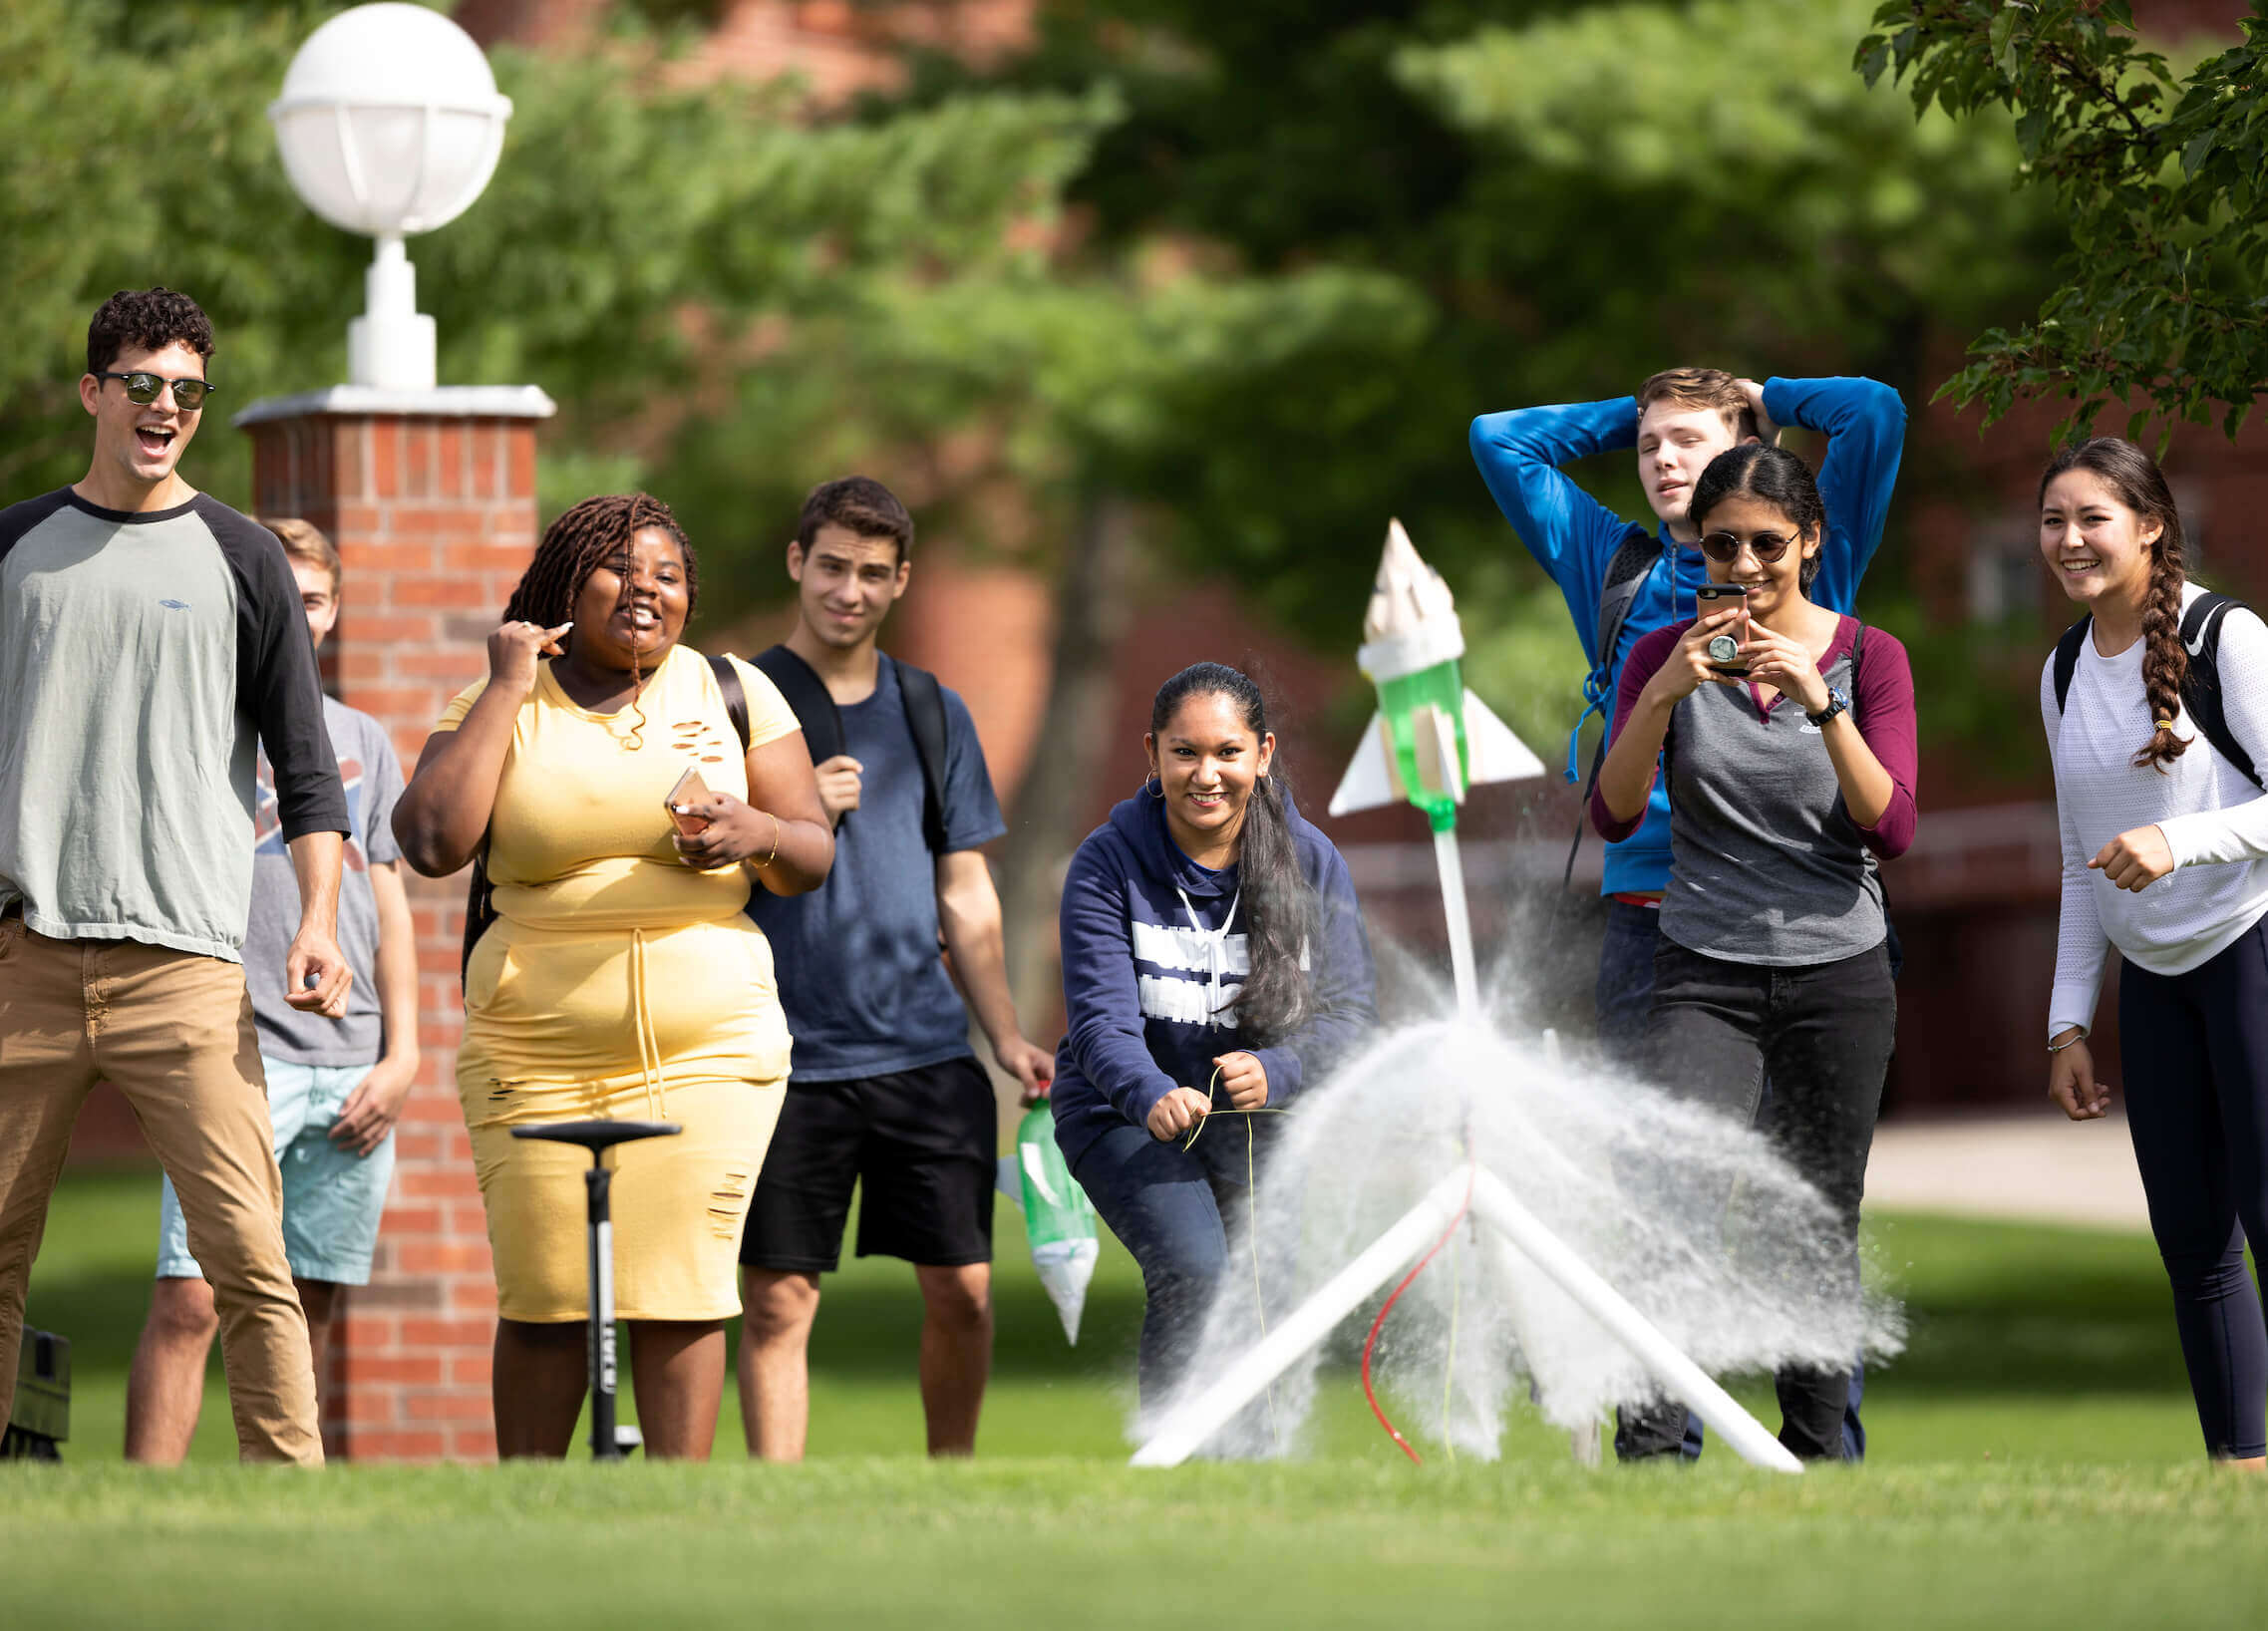 First-year engineering students launch water-bottle rockets into the air during class outside the Center for Communications and Engineering on Quinnipiac's Mount Carmel Campus